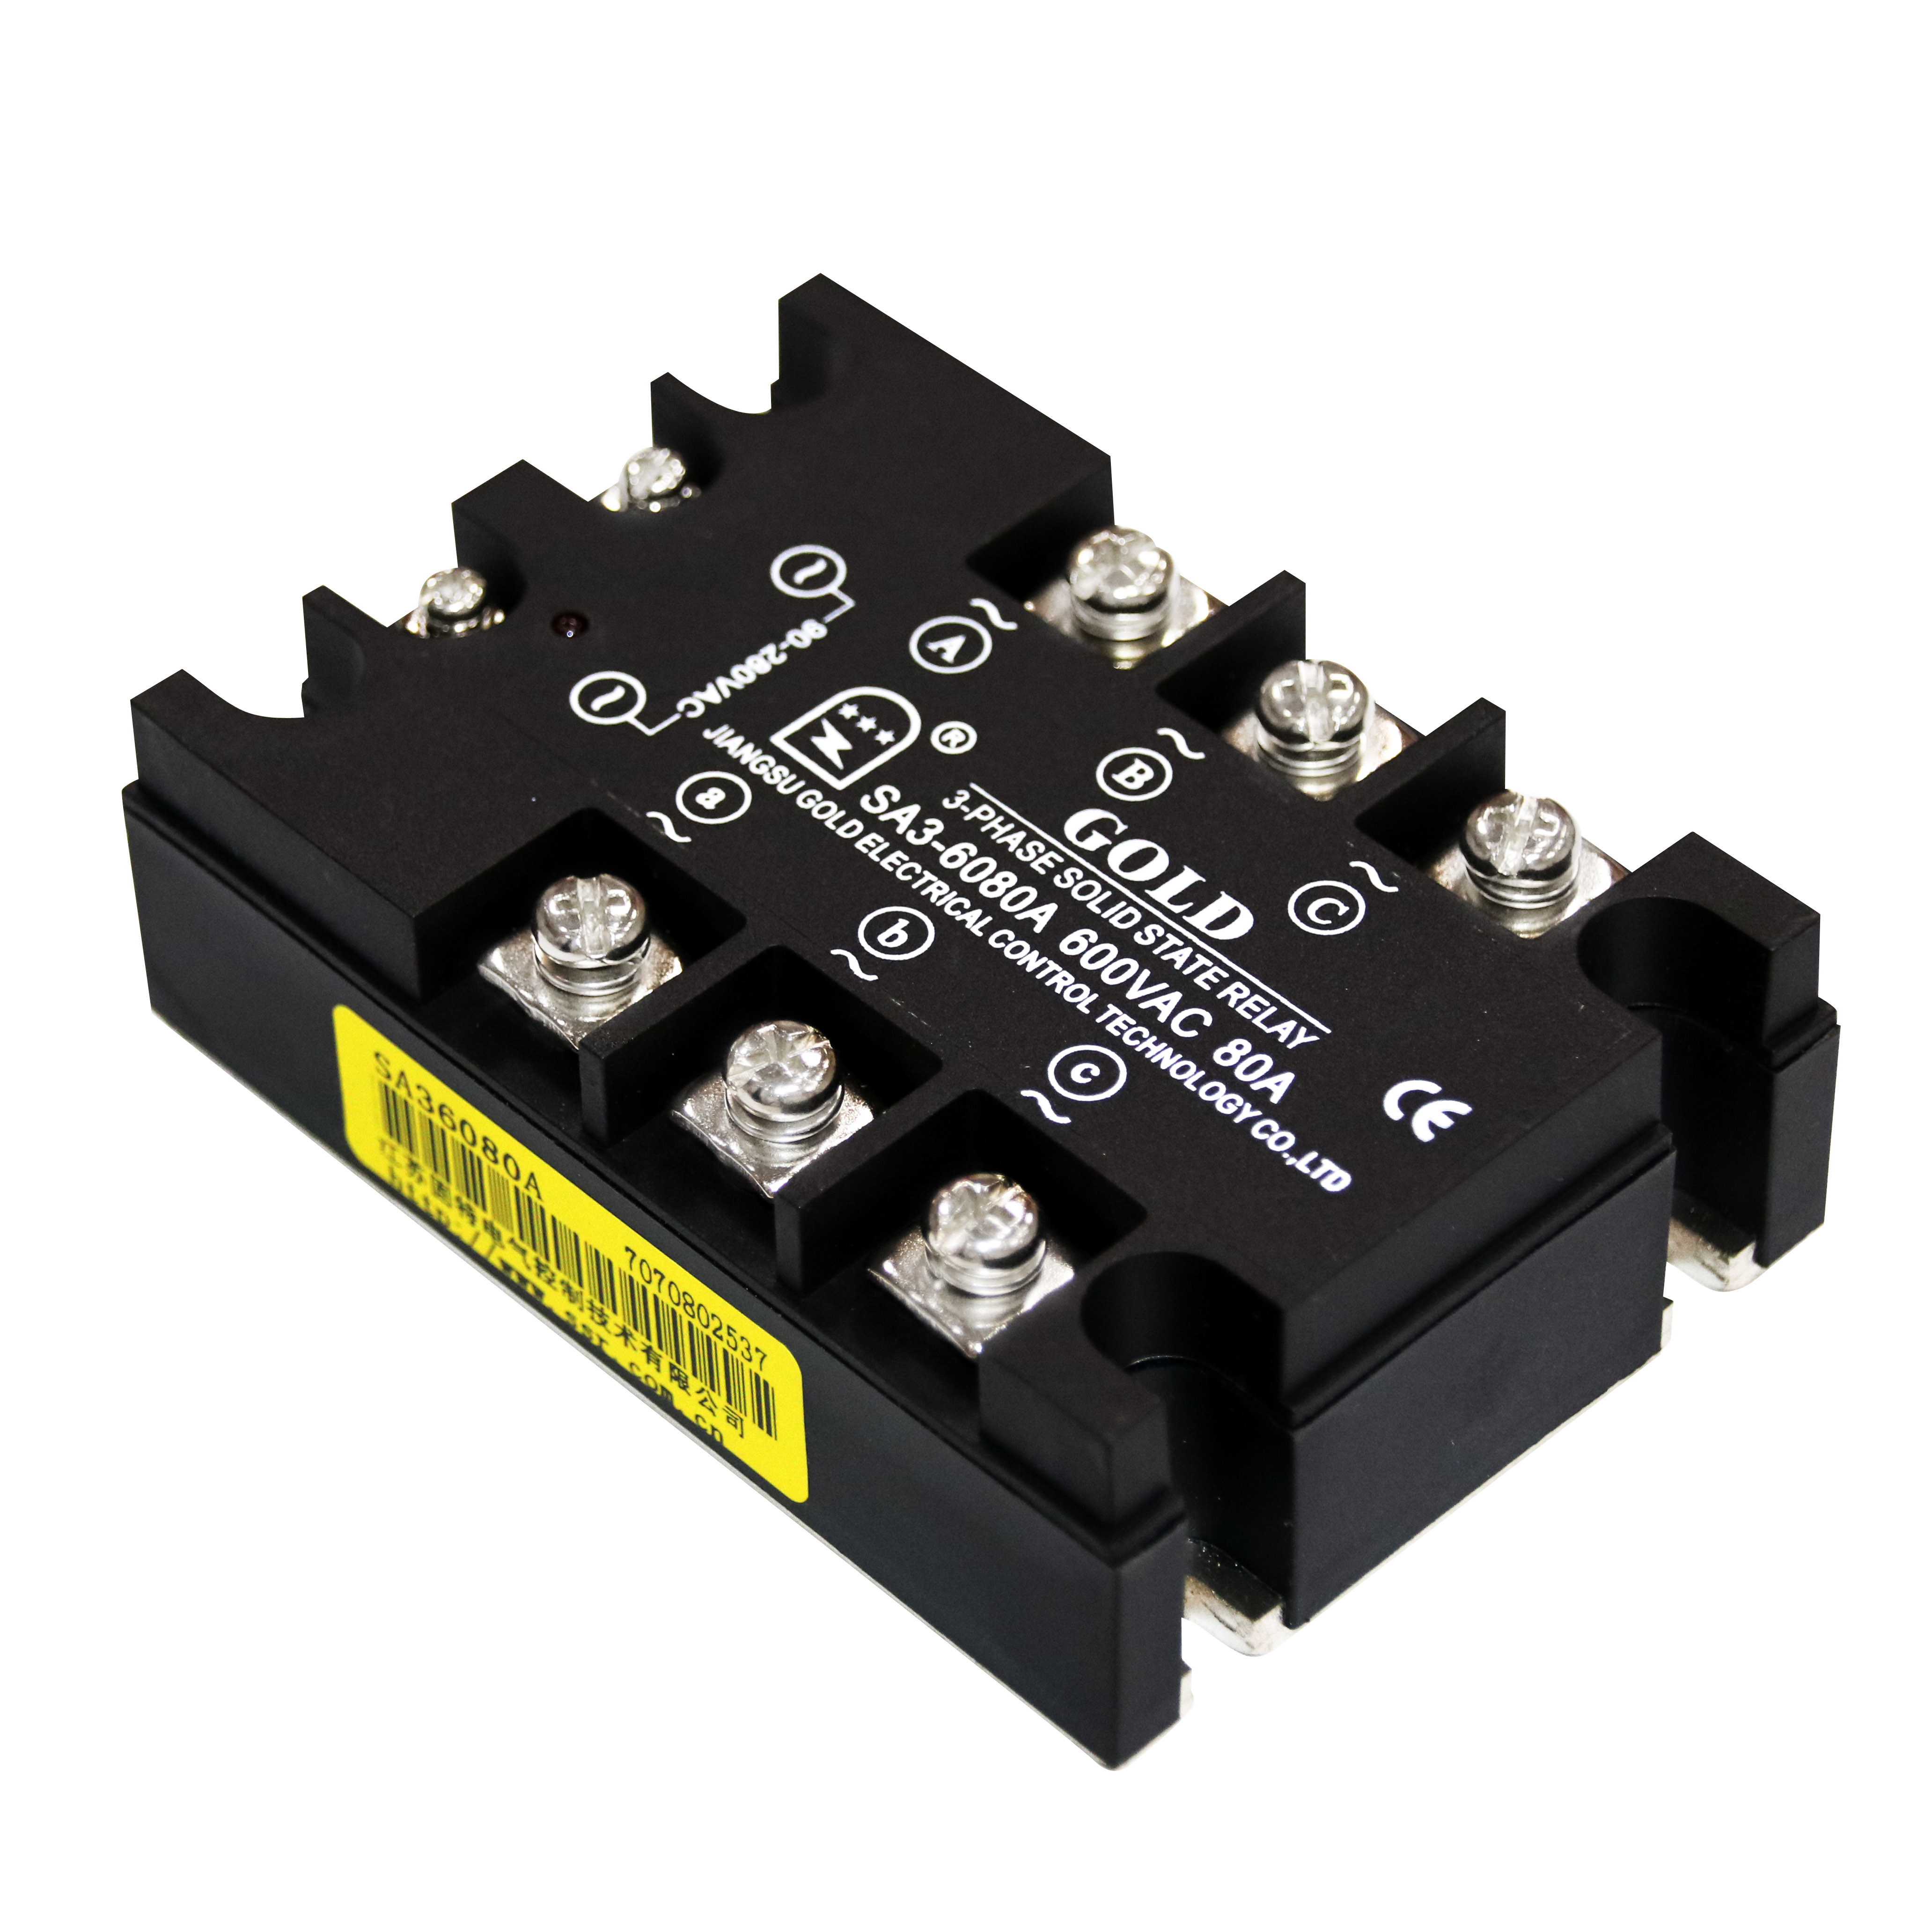 Buy cheap 3 Phase SSR Relay 24vdc 20a from wholesalers